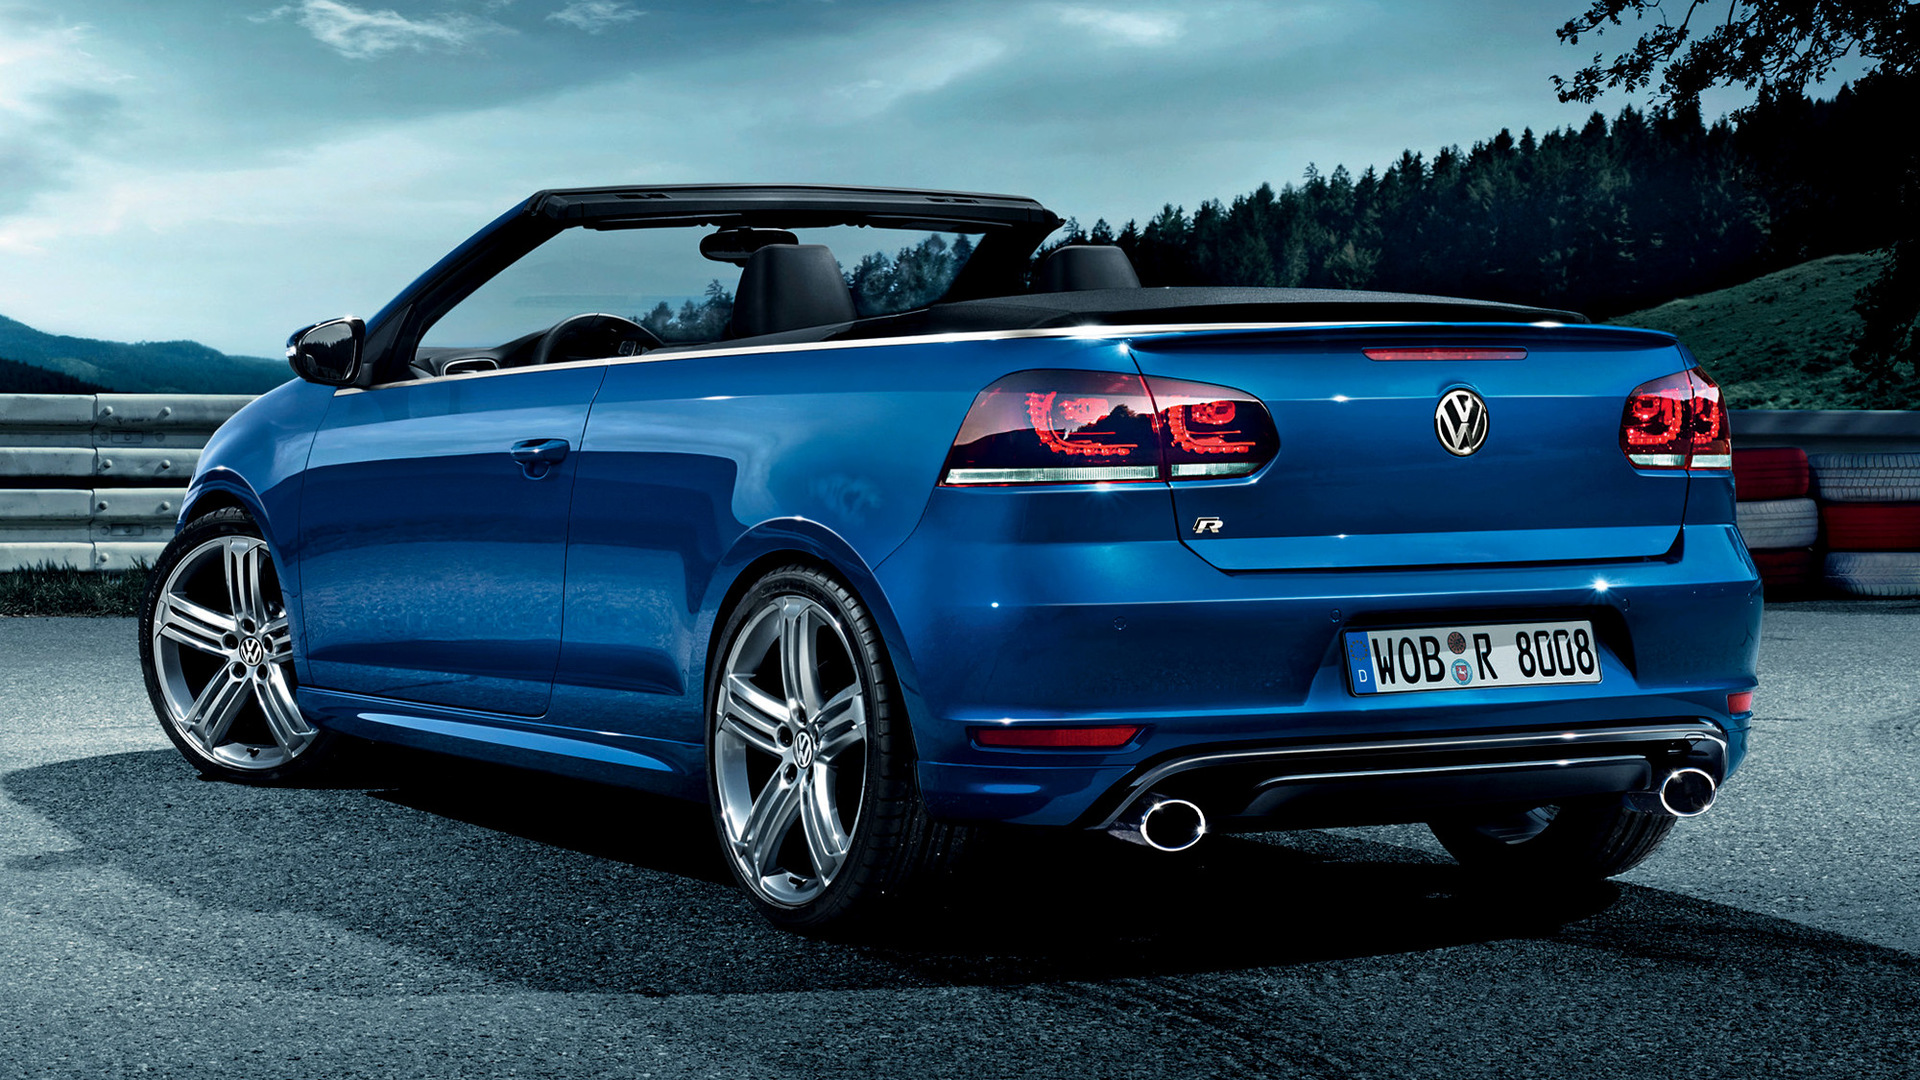 Volkswagen Golf R Cabriolet 2013 Wallpapers and HD Images 1920x1080